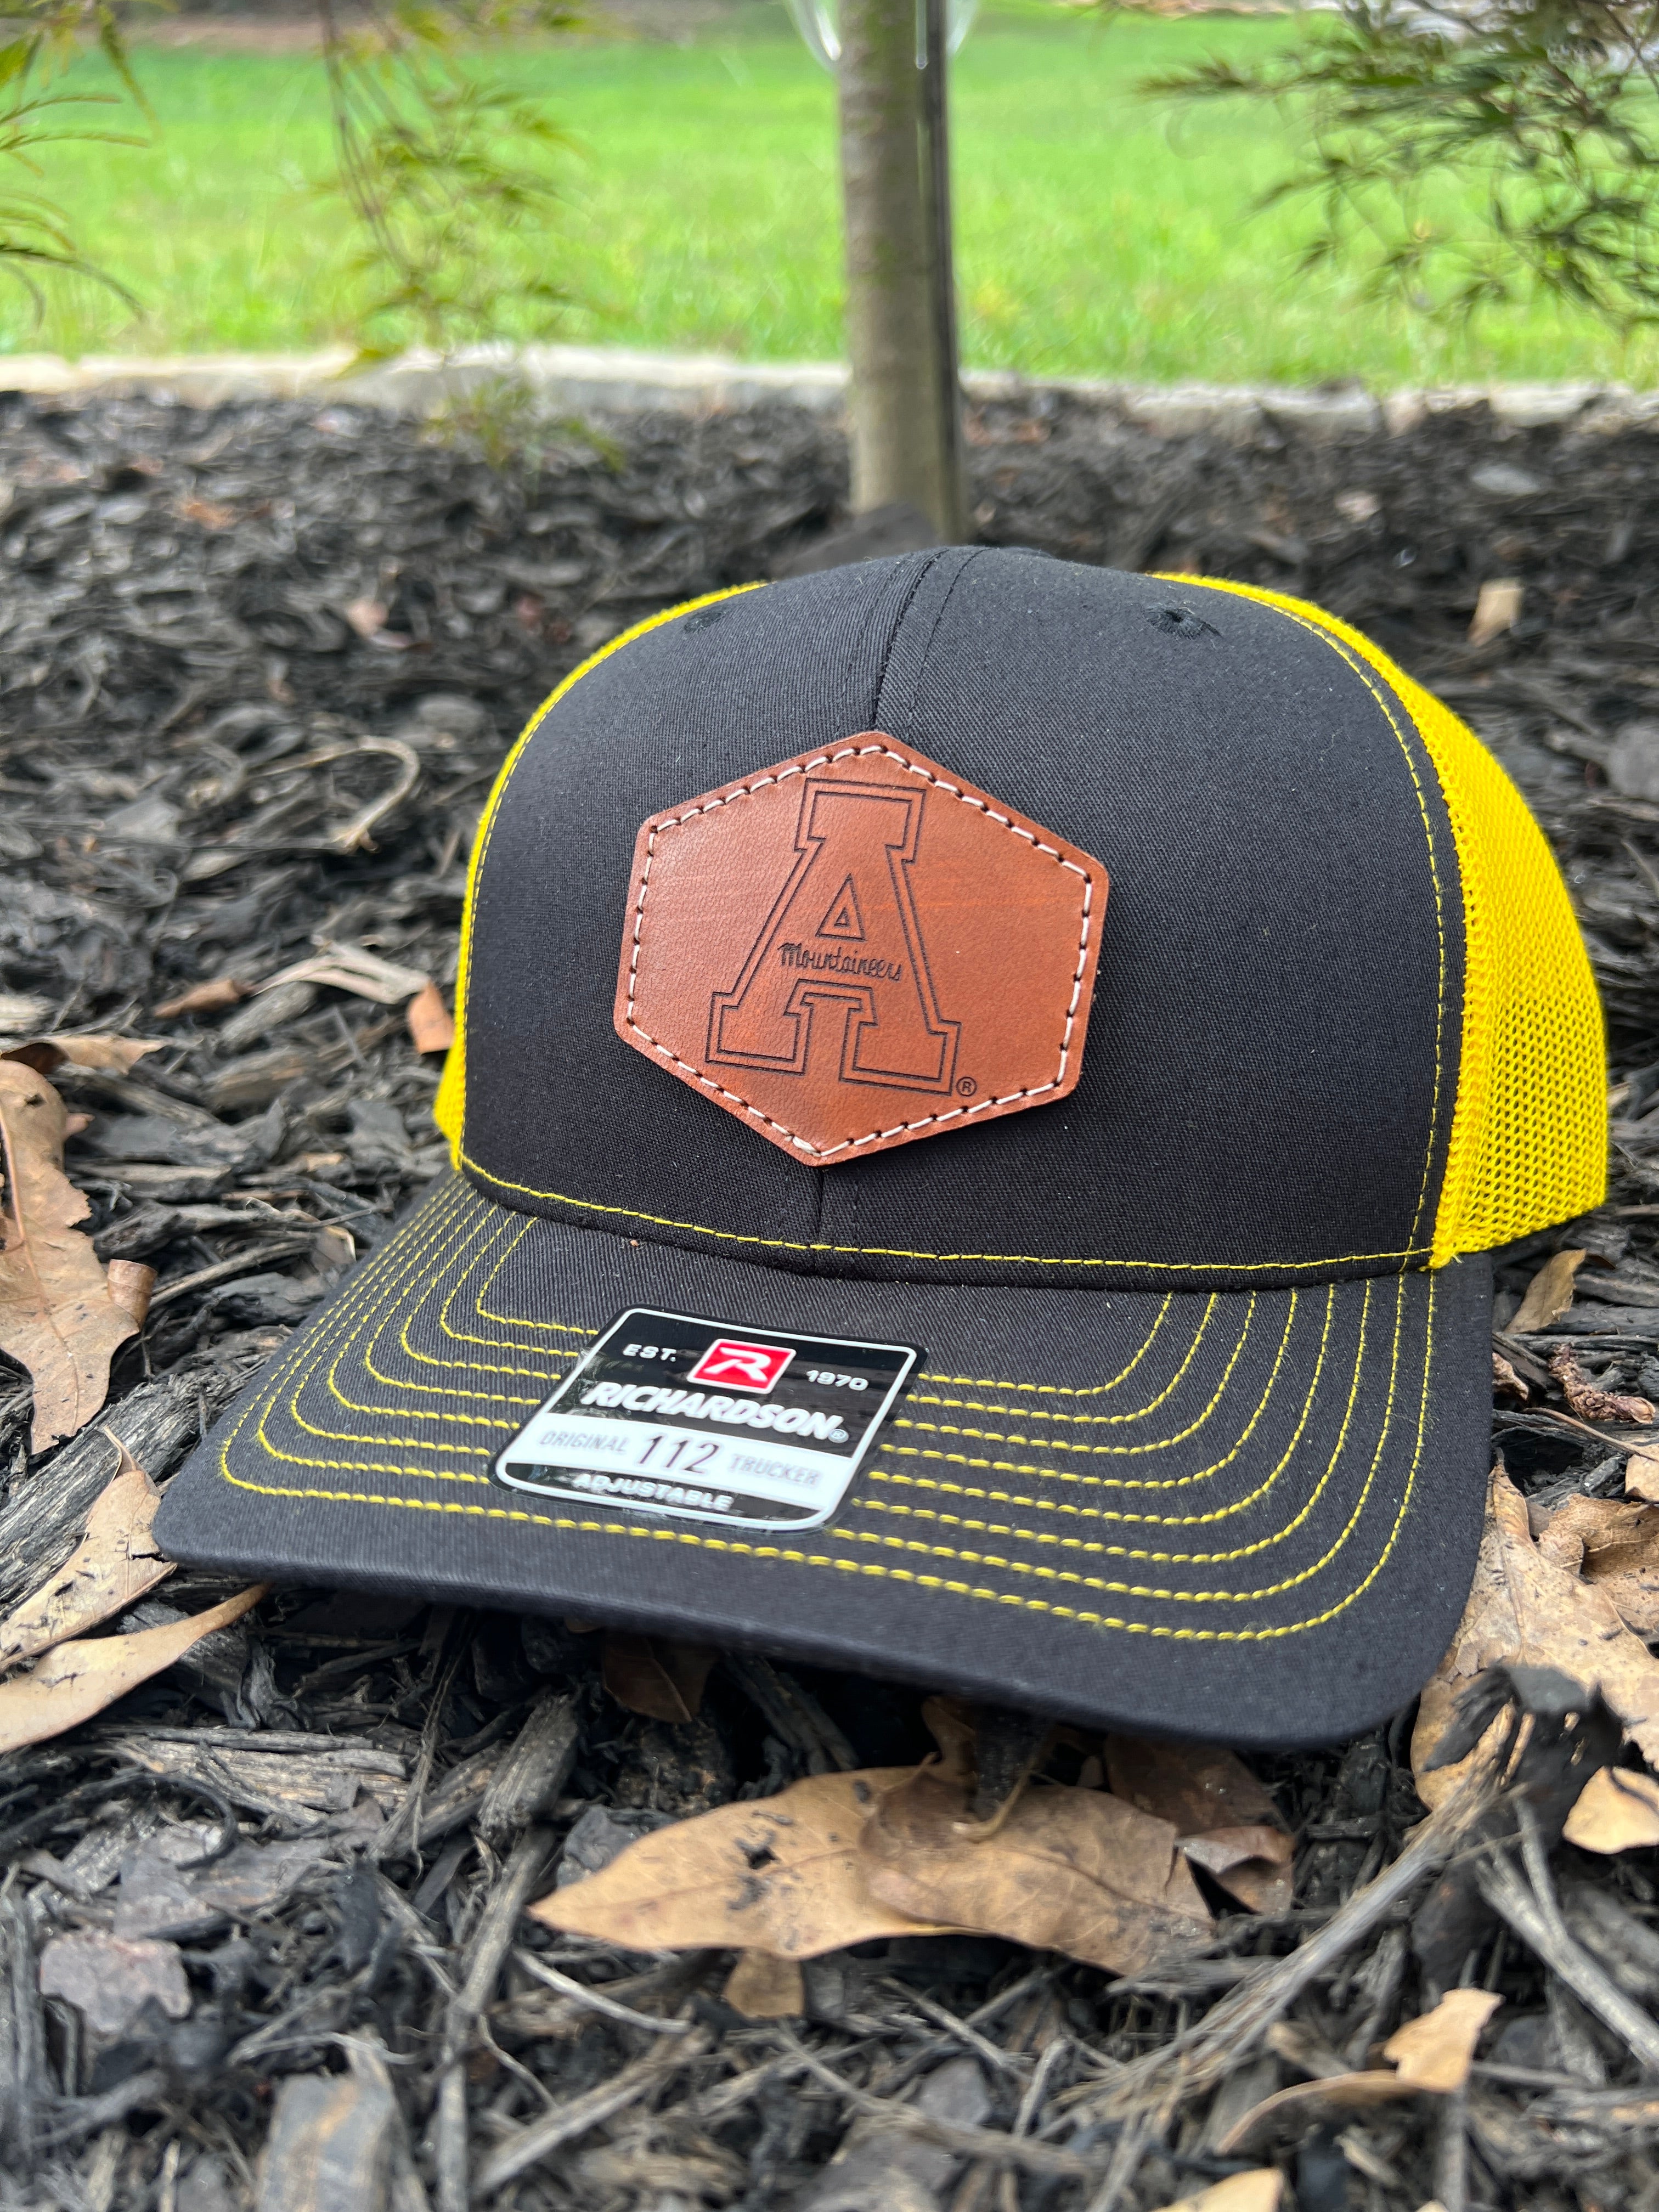 Appalachian State Leather Patch Hat ("A" with Mountaineers text)